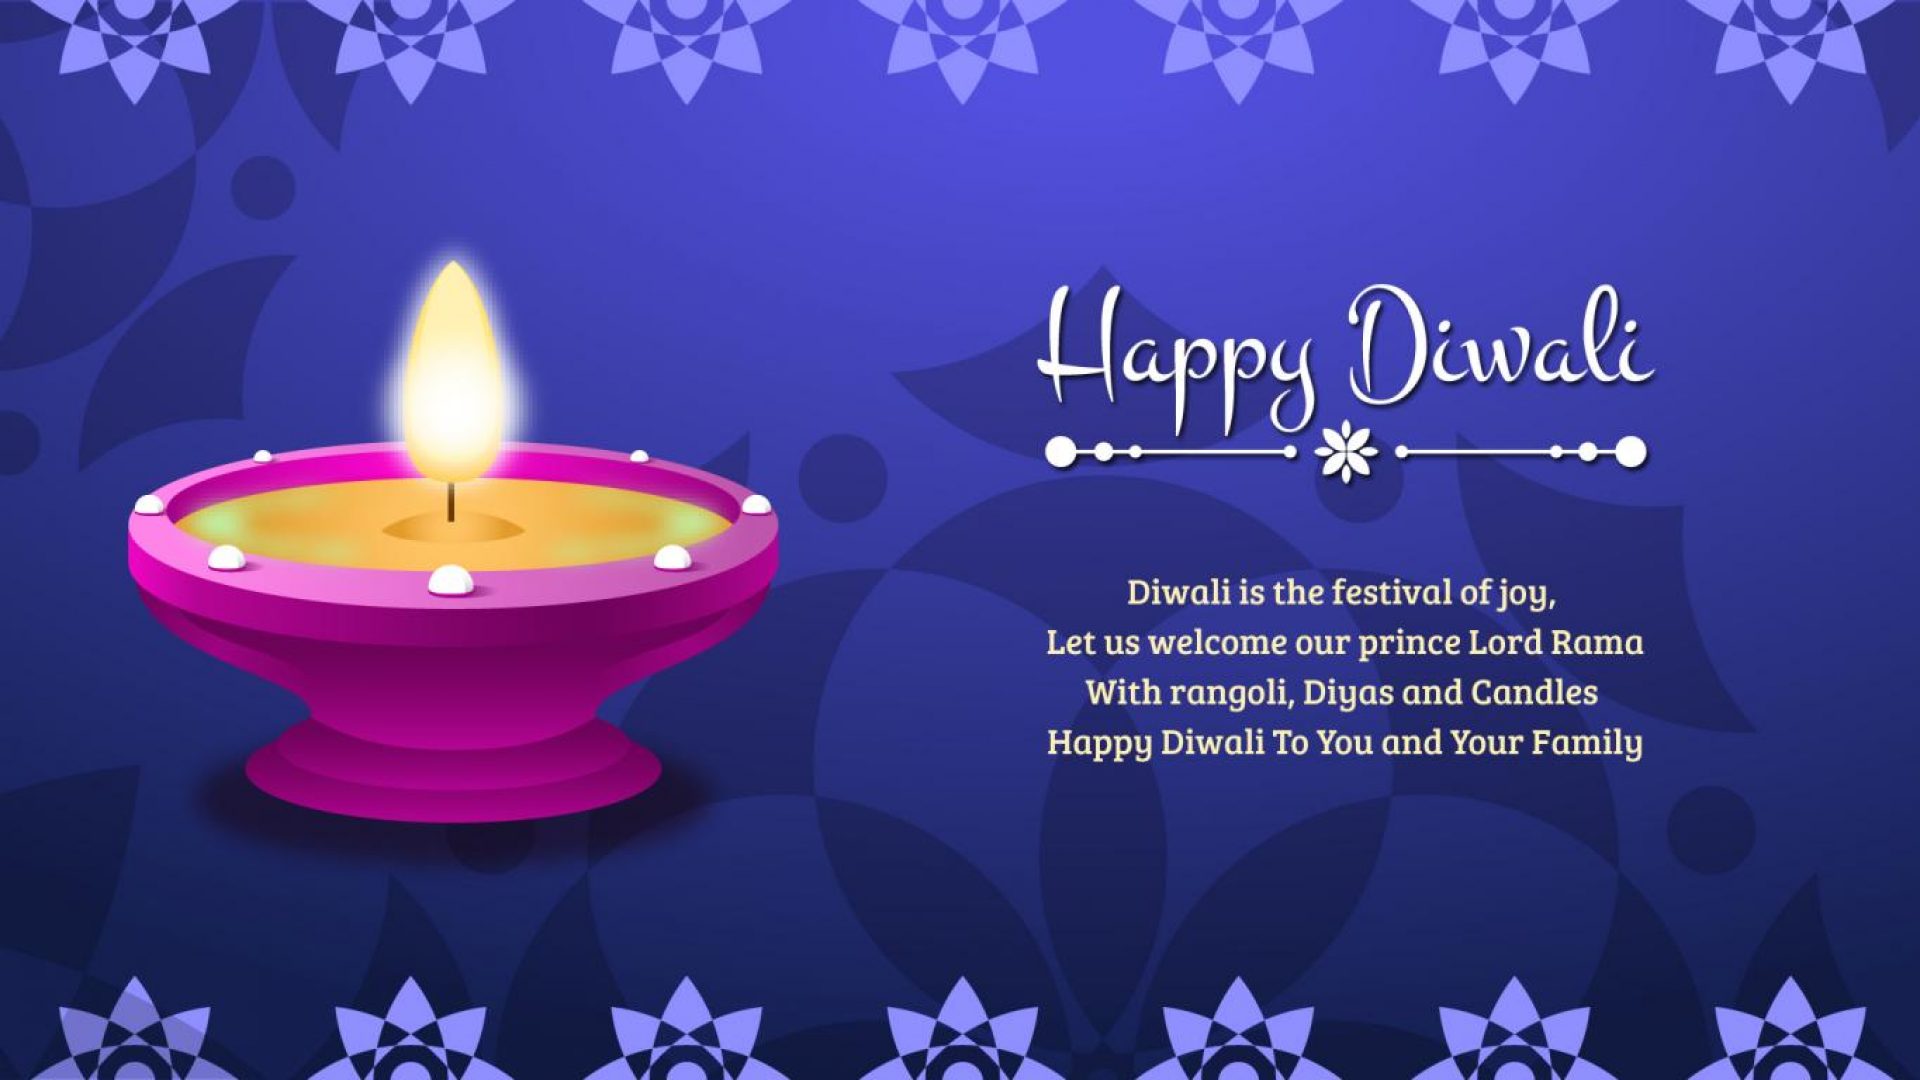 Top 55 Happy Diwali Images Photos Pictures Wallpapers With Diwali Wishes   SocialStatusDPcom